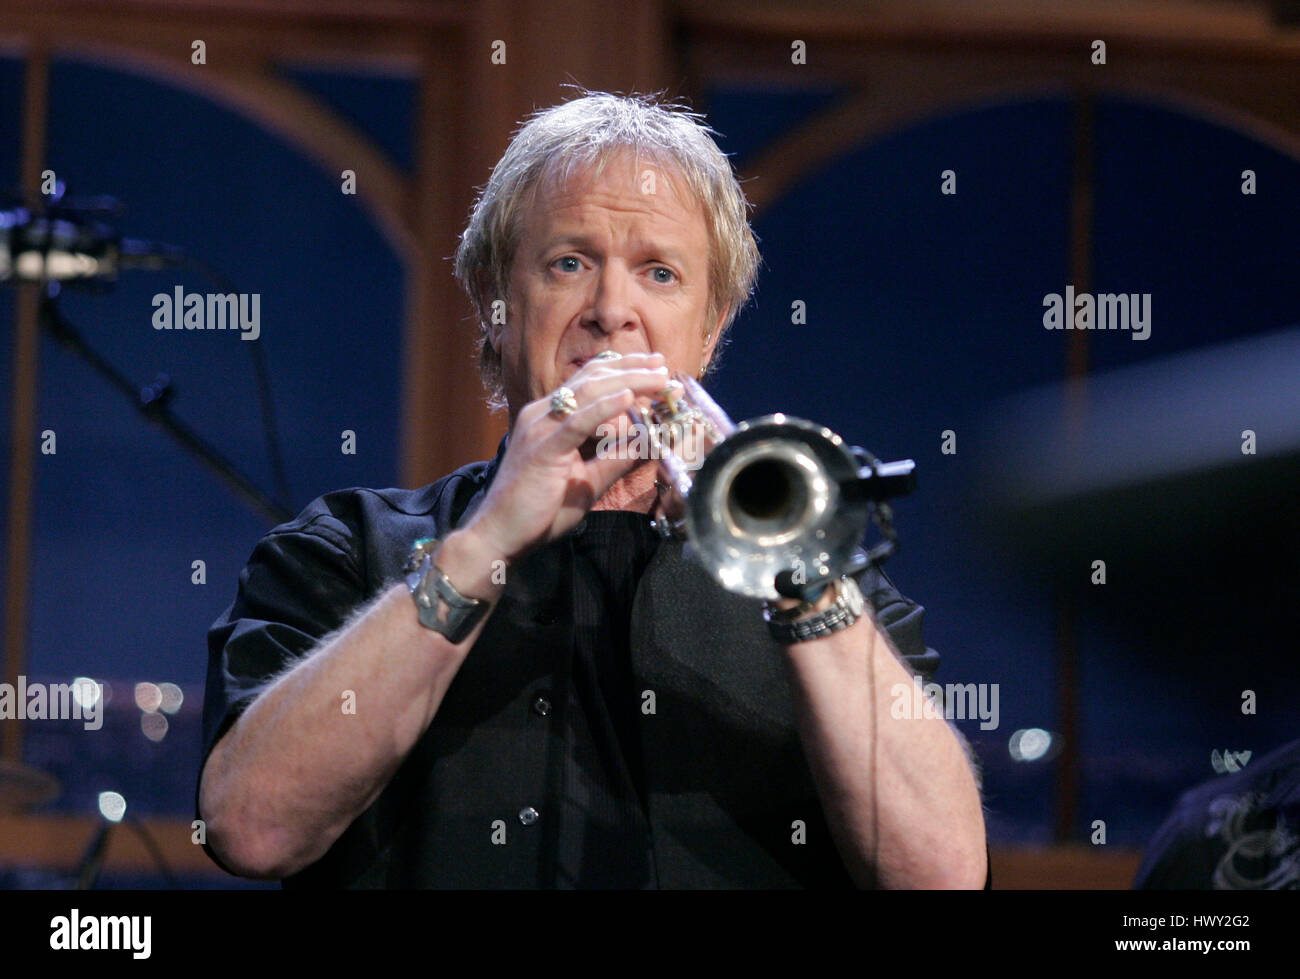 The band, Chicago, with member Lee Loughnane on trumpet, perform during a  segment of 'The Late Late Show with Craig Ferguson' at CBS Television City  in Los Angeles, California, on March 9,